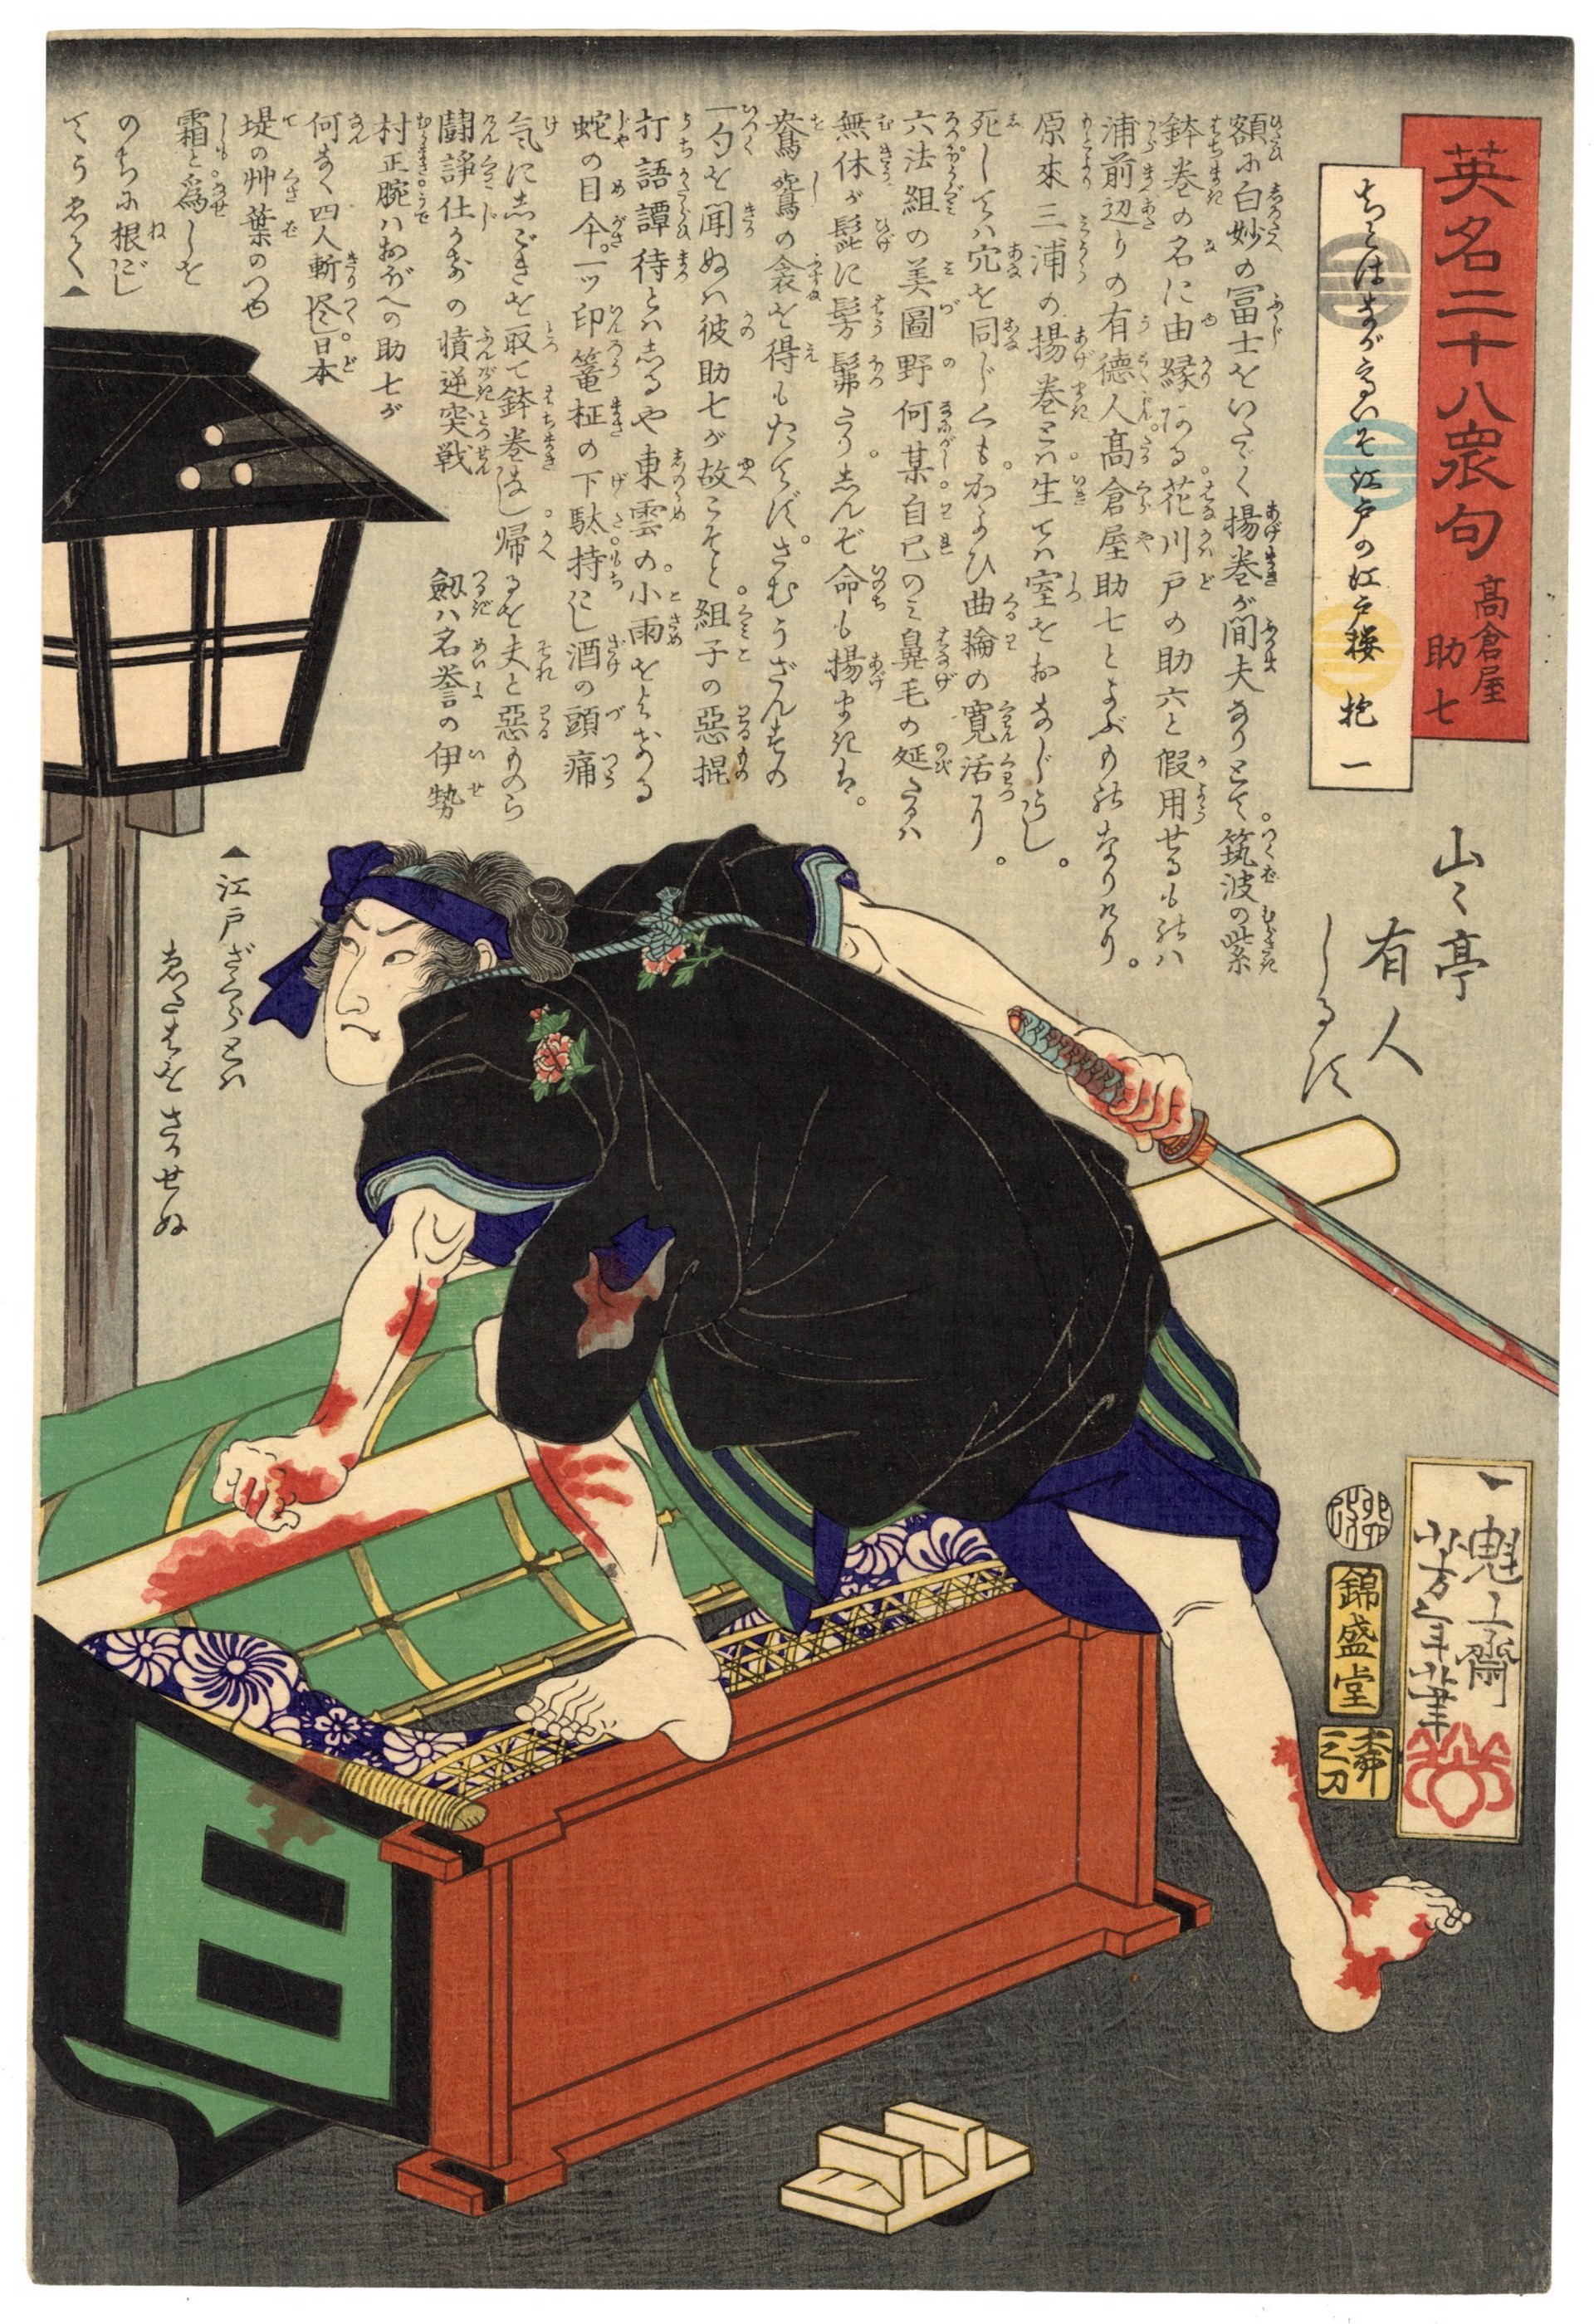 #11 Takakura Sukeshichi, the Outlaw, Standing on an Overturned Palanquin by Yoshitoshi